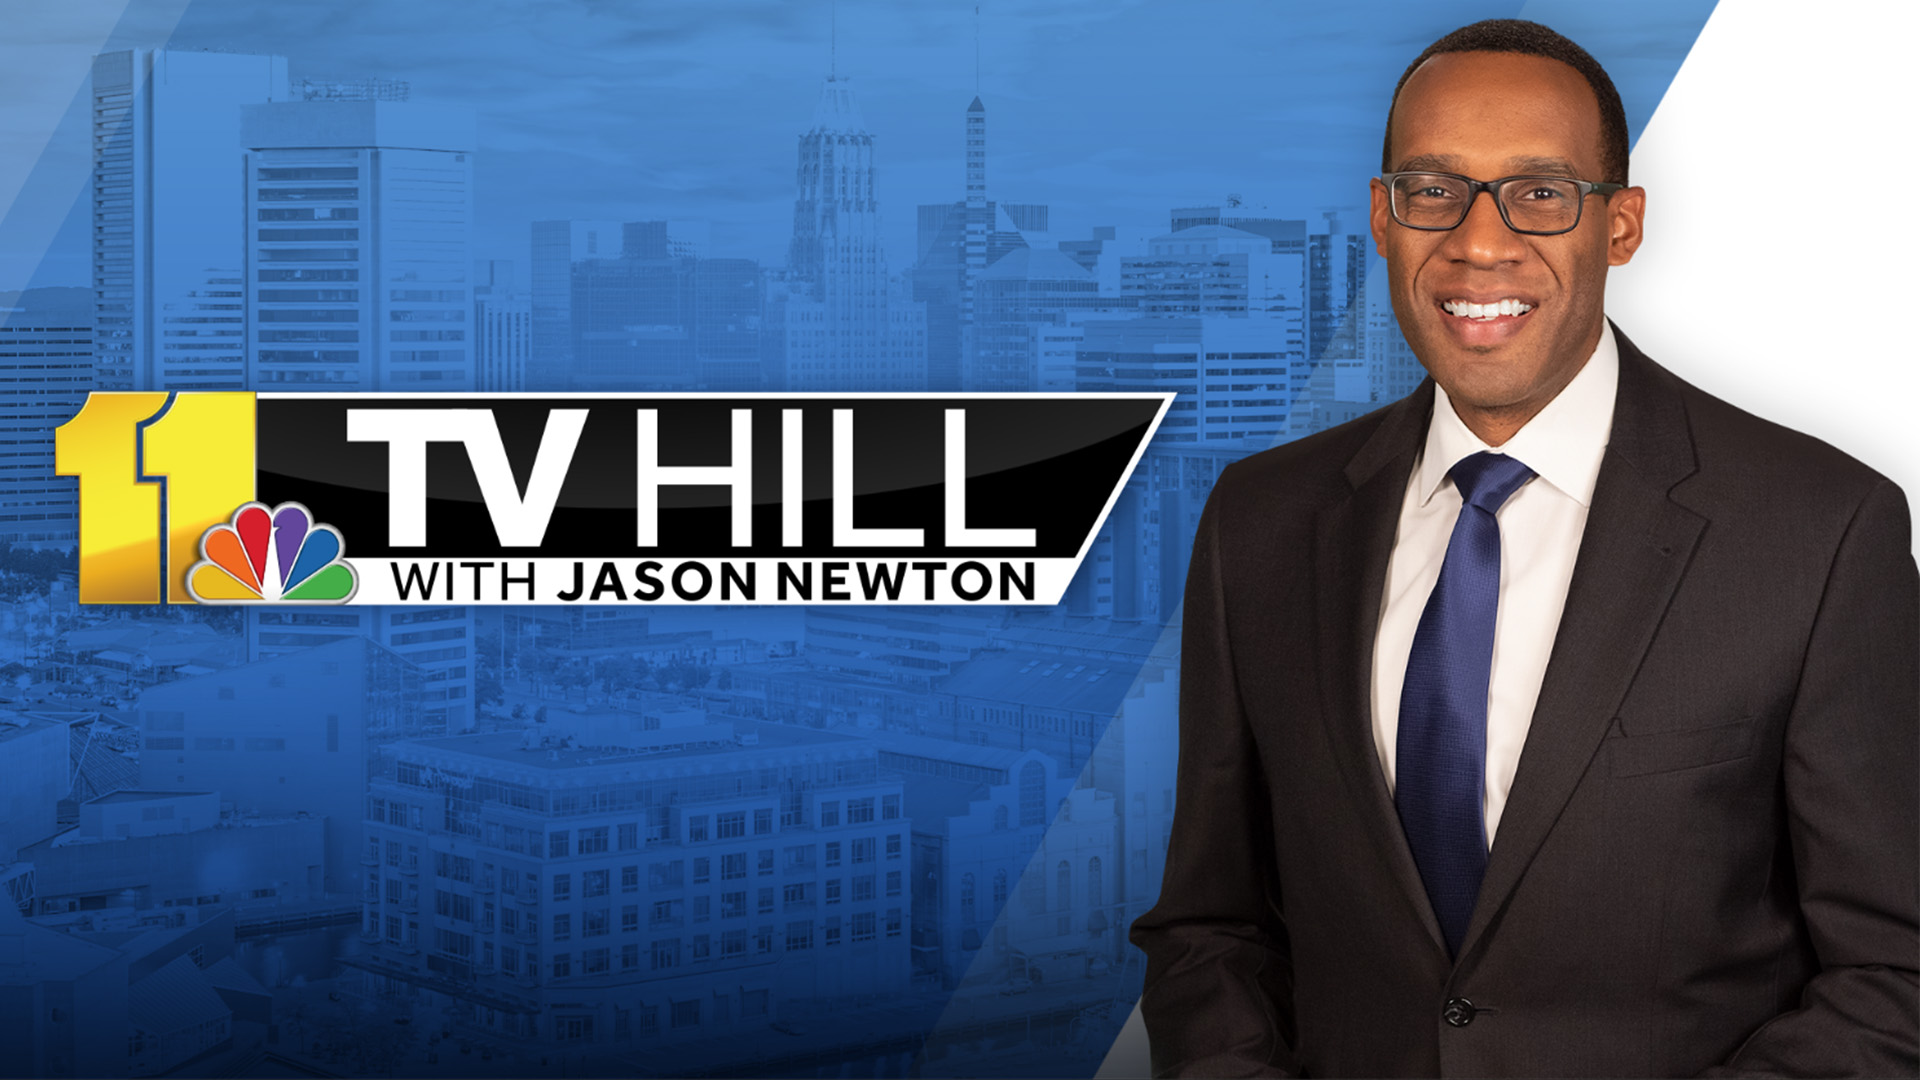 11 TV Hill feature image